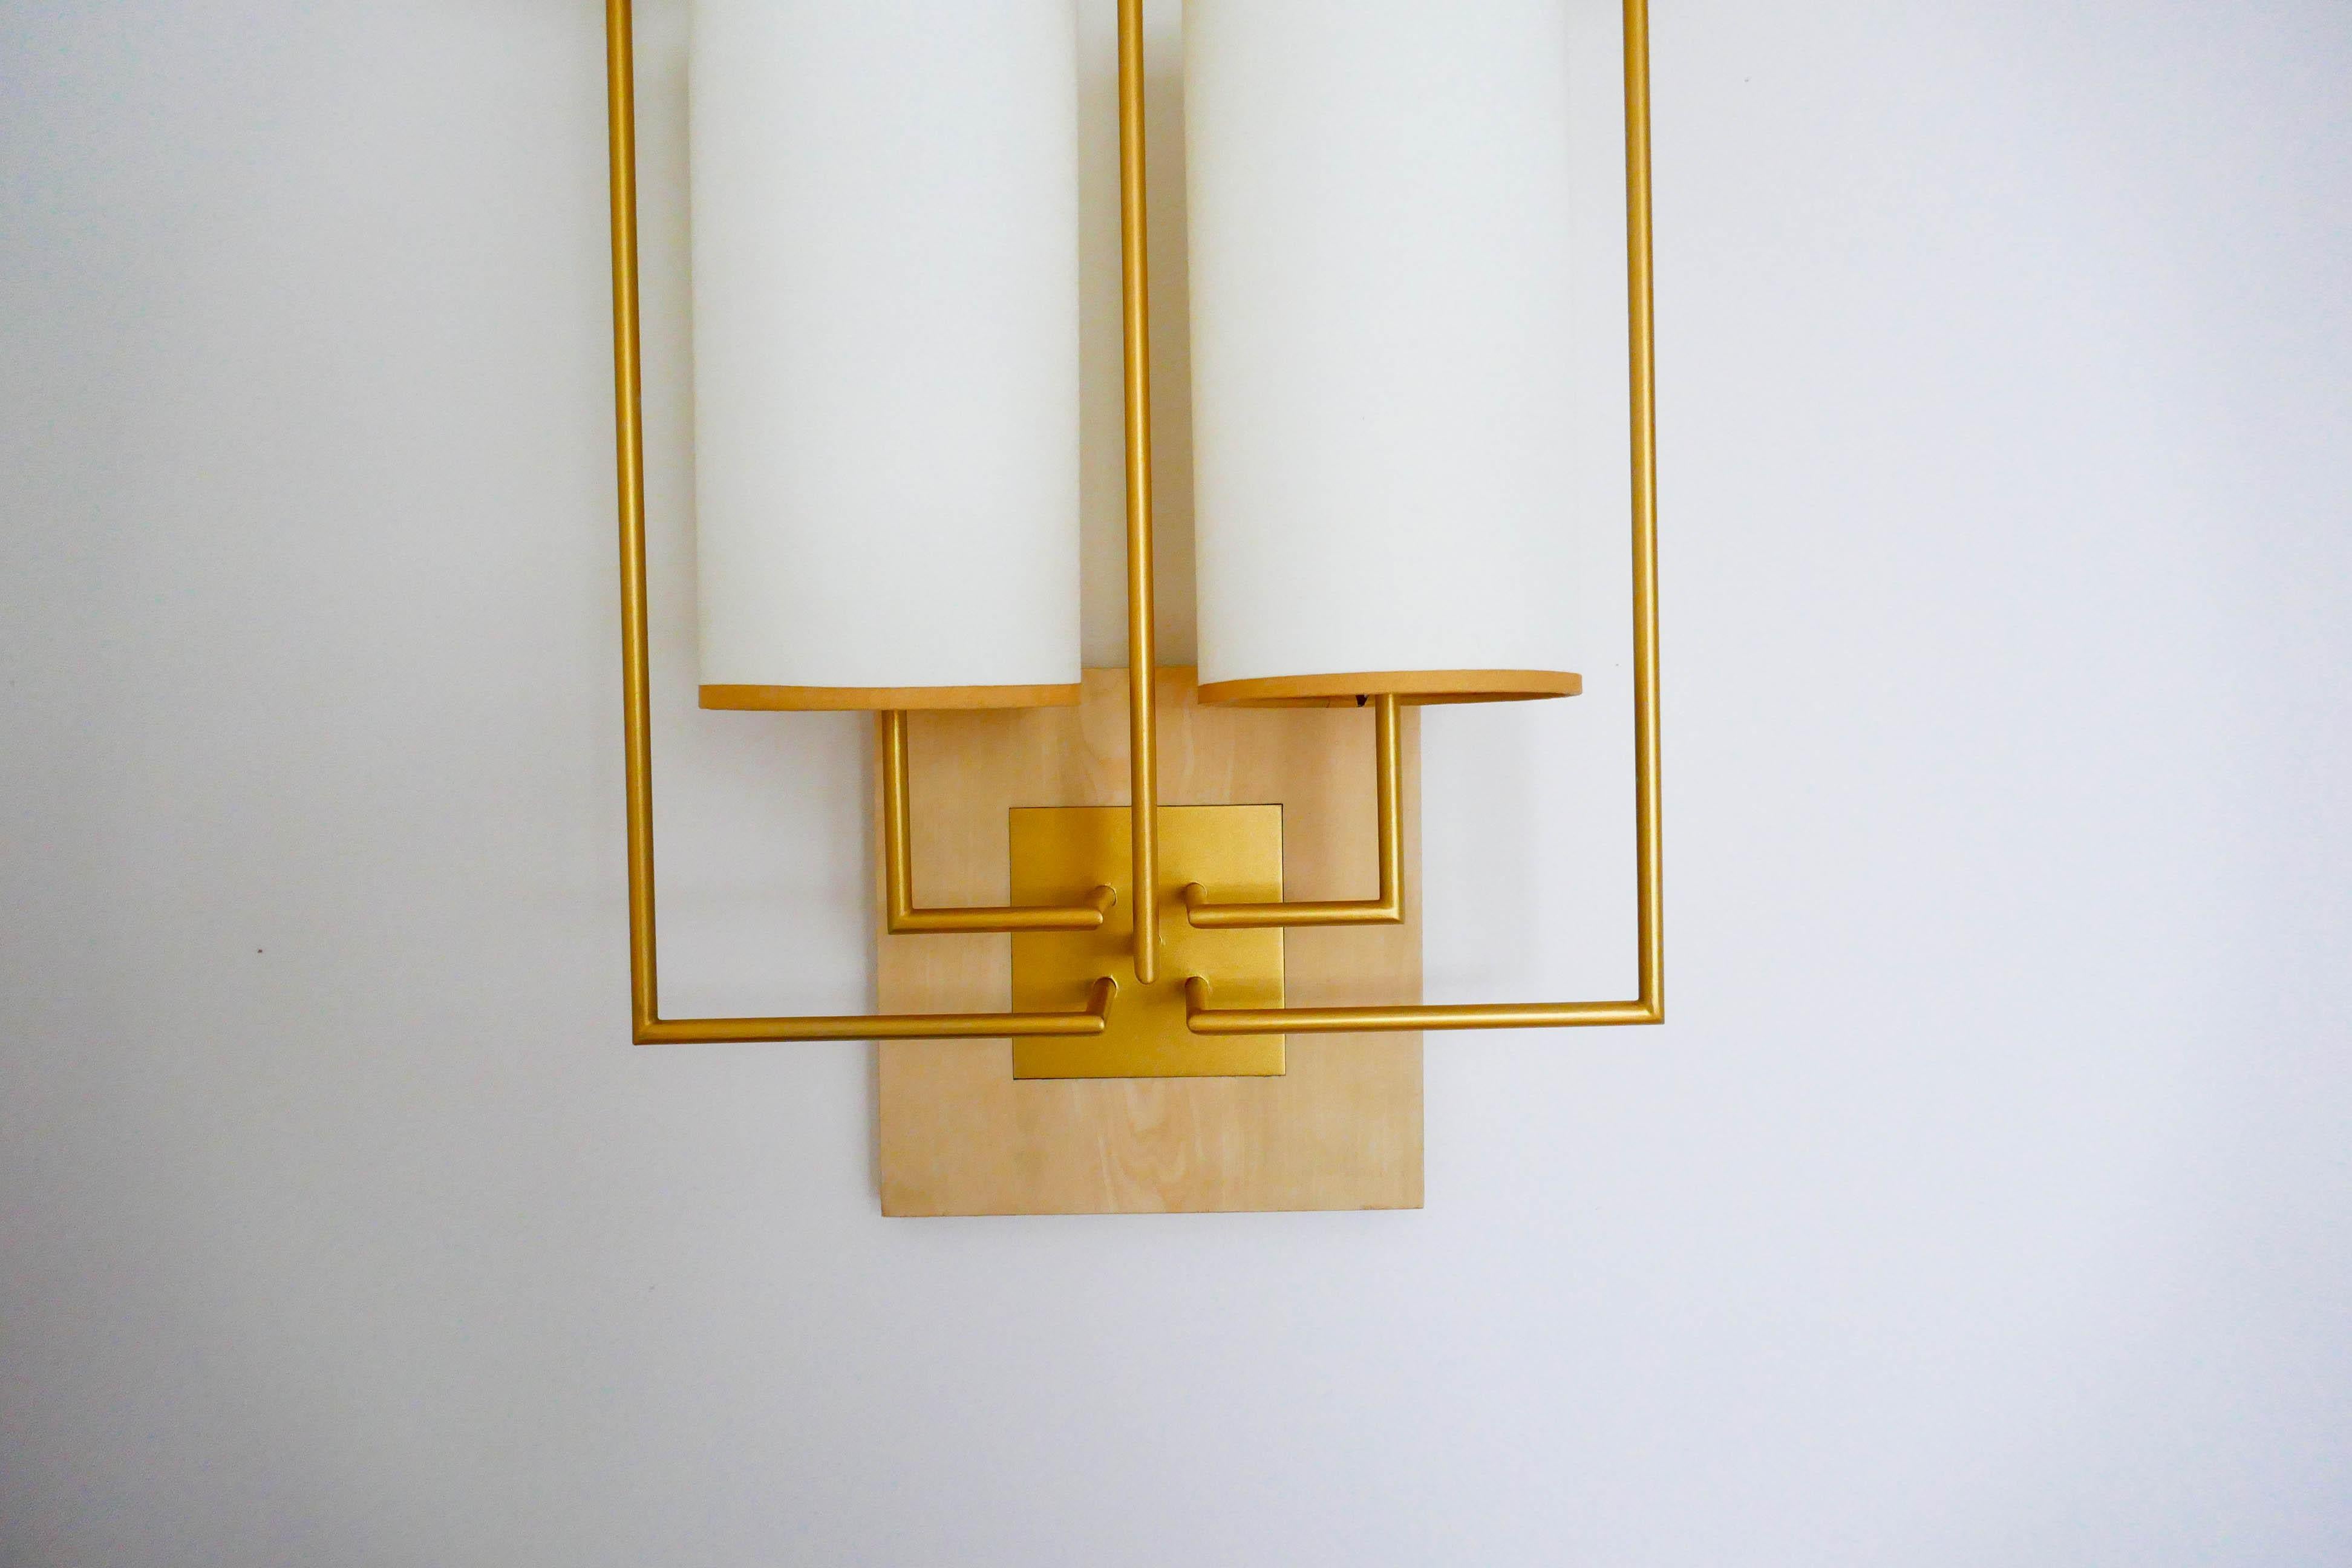 Pair of Wall Lamp Sconce in Gold Patina and White Fabric Lamp Shades For Sale 4